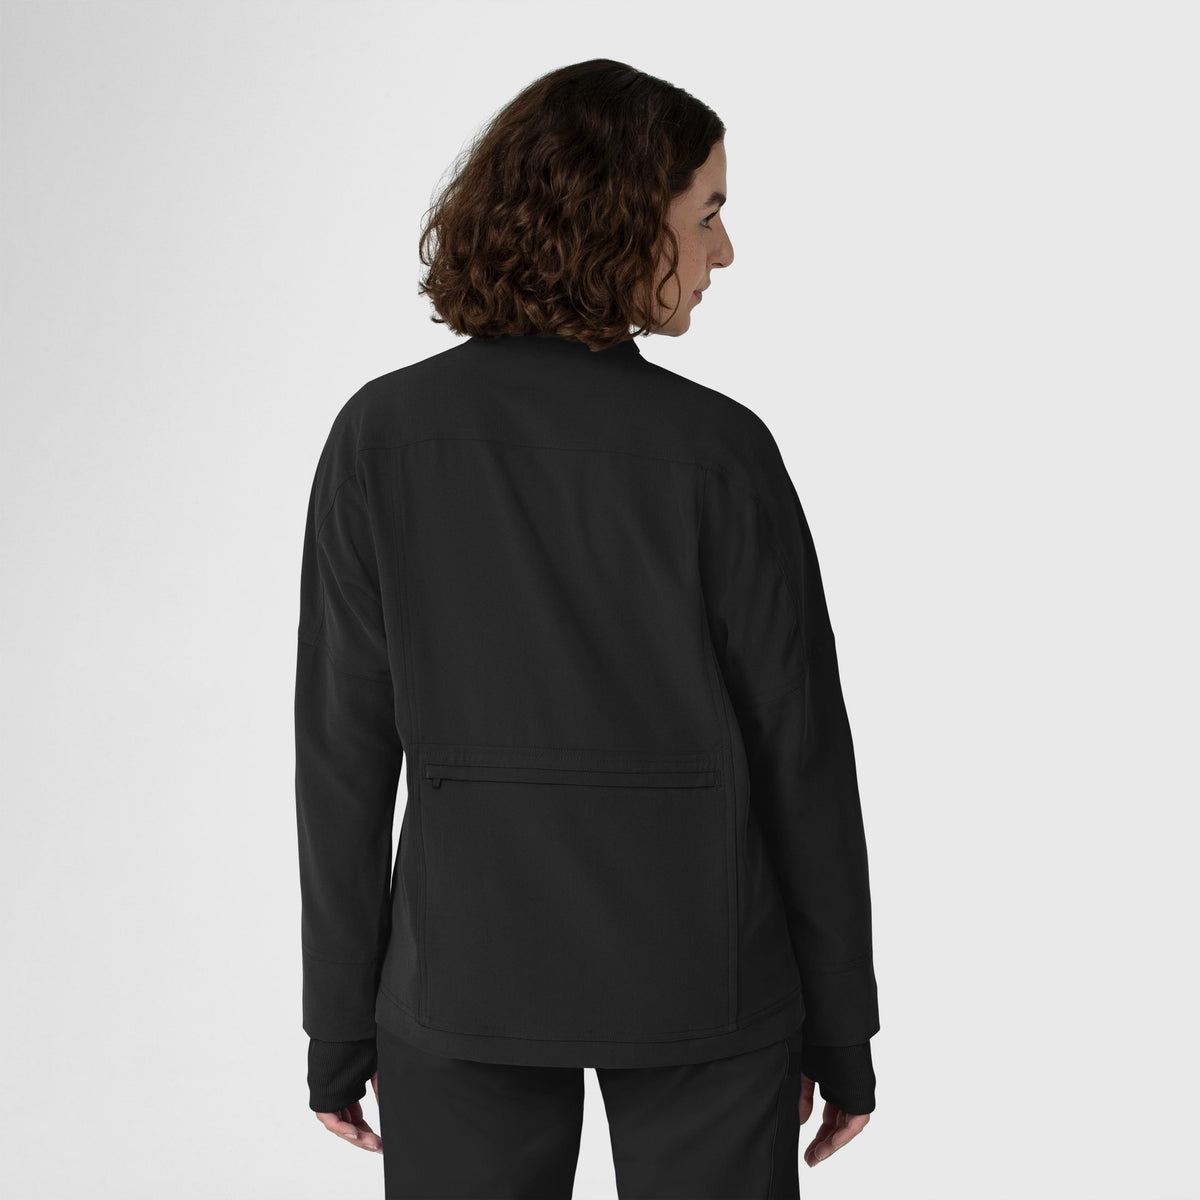 Knits and Layers Women's Germs Happen Packable Scrub Jacket Black back view